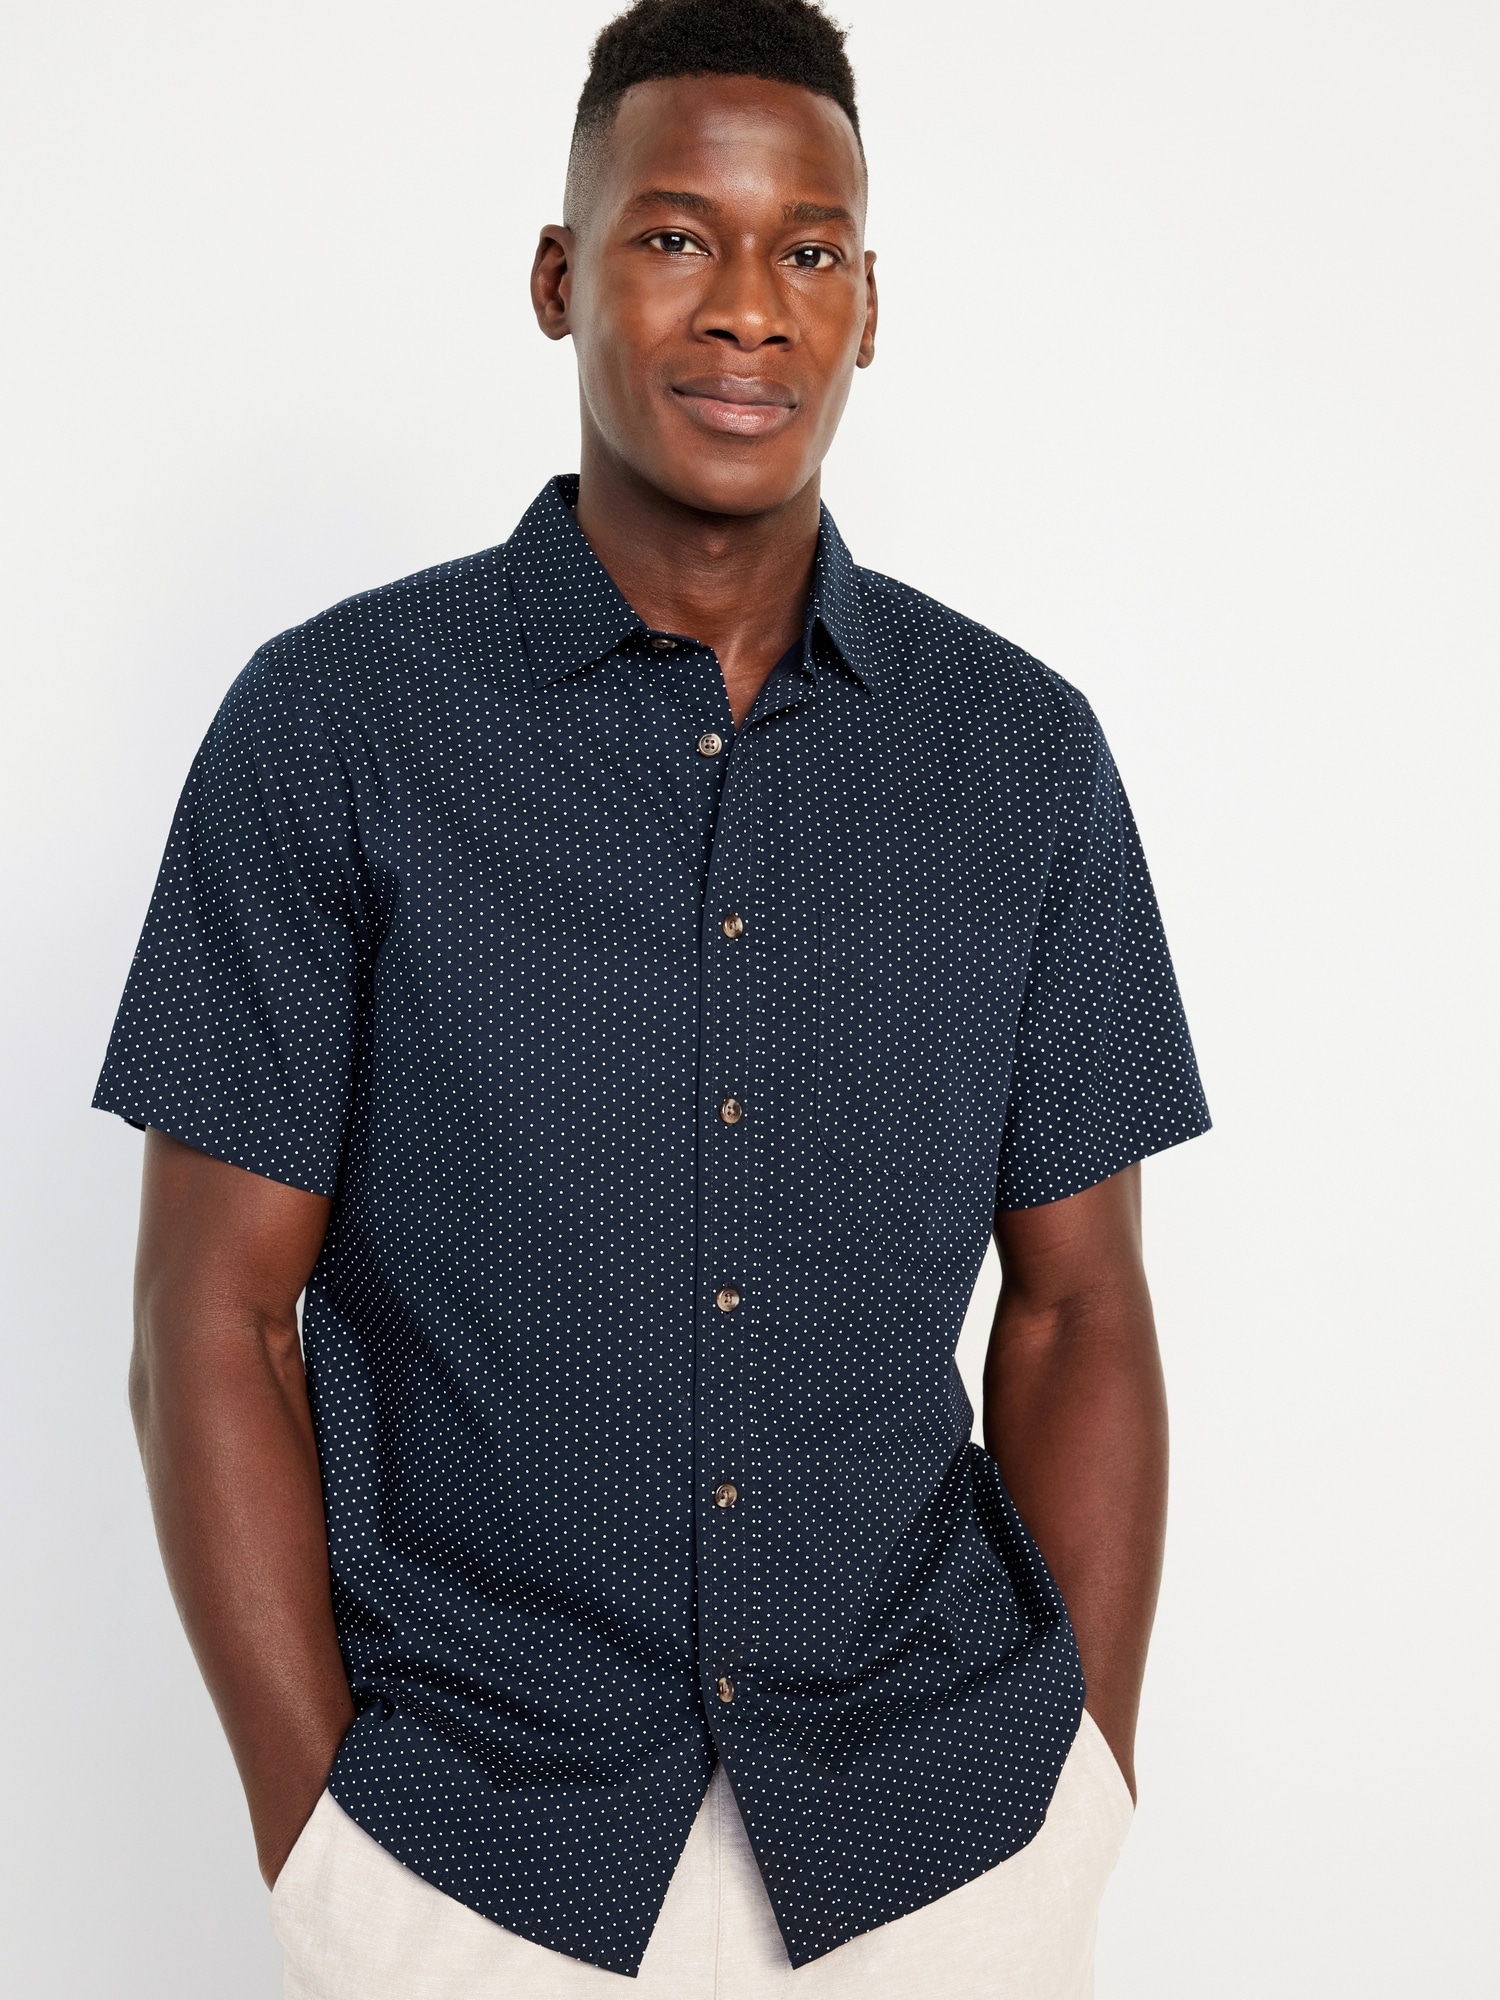 Classic Fit Non-Stretch Everyday Shirt